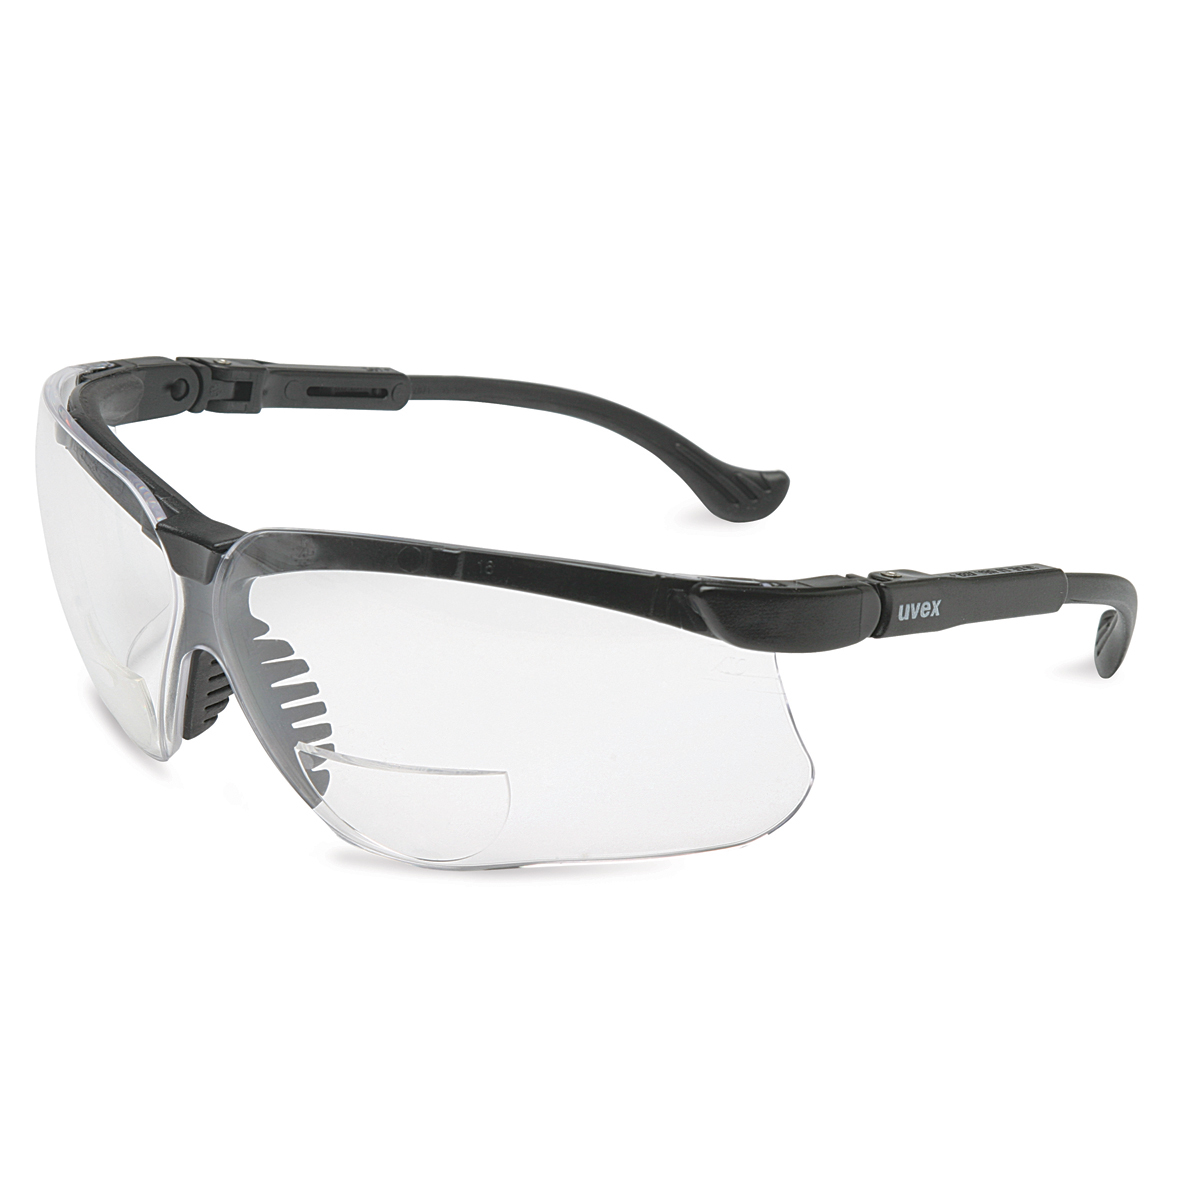 Honeywell Uvex Genesis® 1.5 Diopter Black Safety Glasses With Clear Anti-Scratch/Hard Coat Lens (Availability restrictions apply